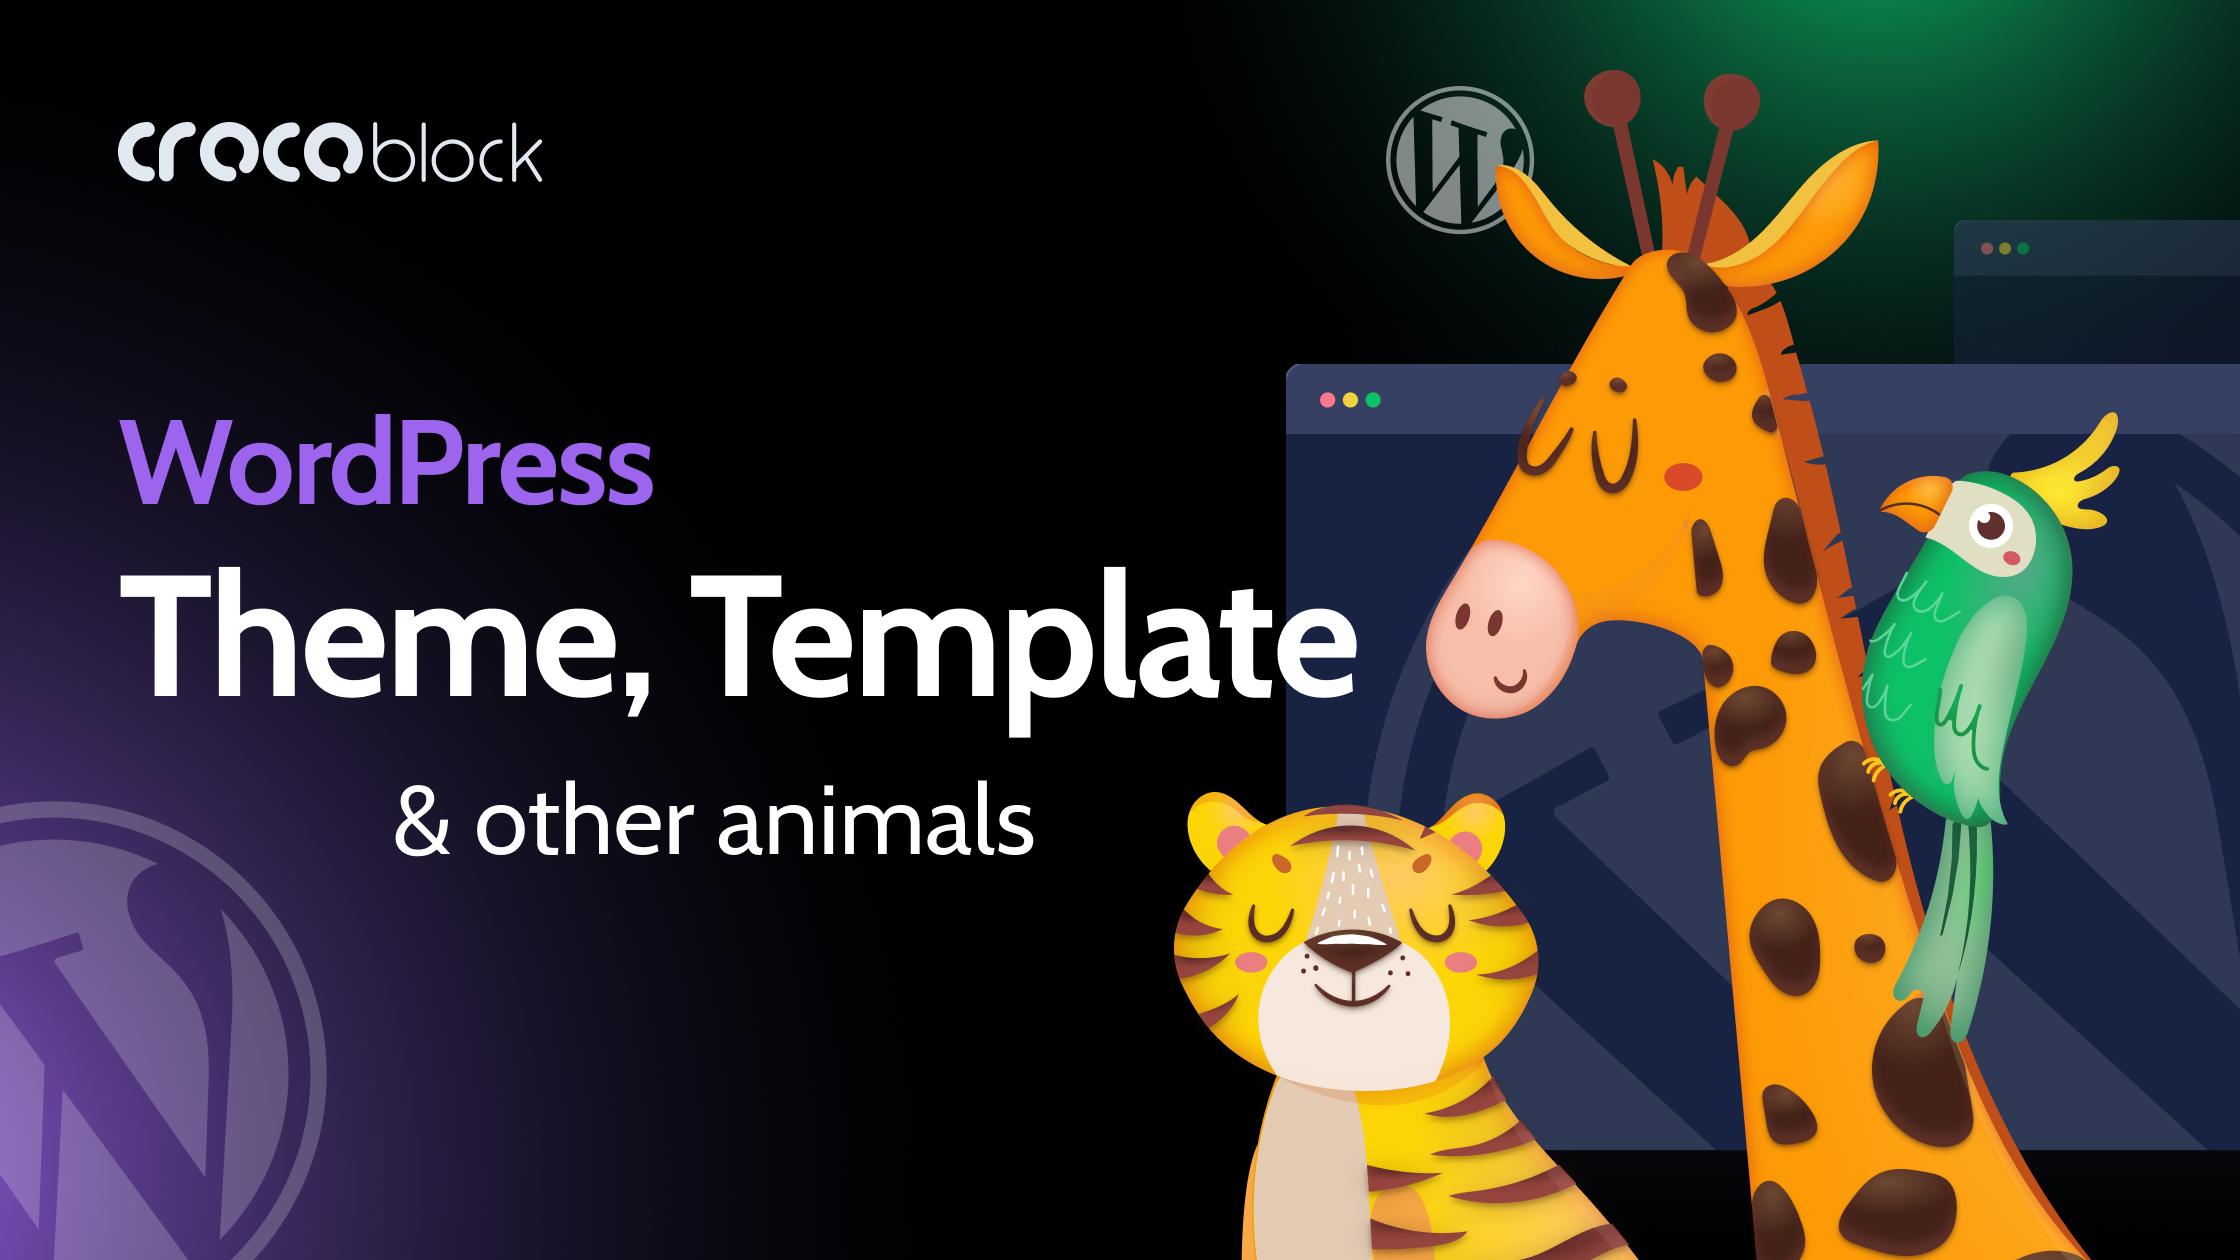 WordPress Theme vs Template And Other WP Terminology - Crocoblock